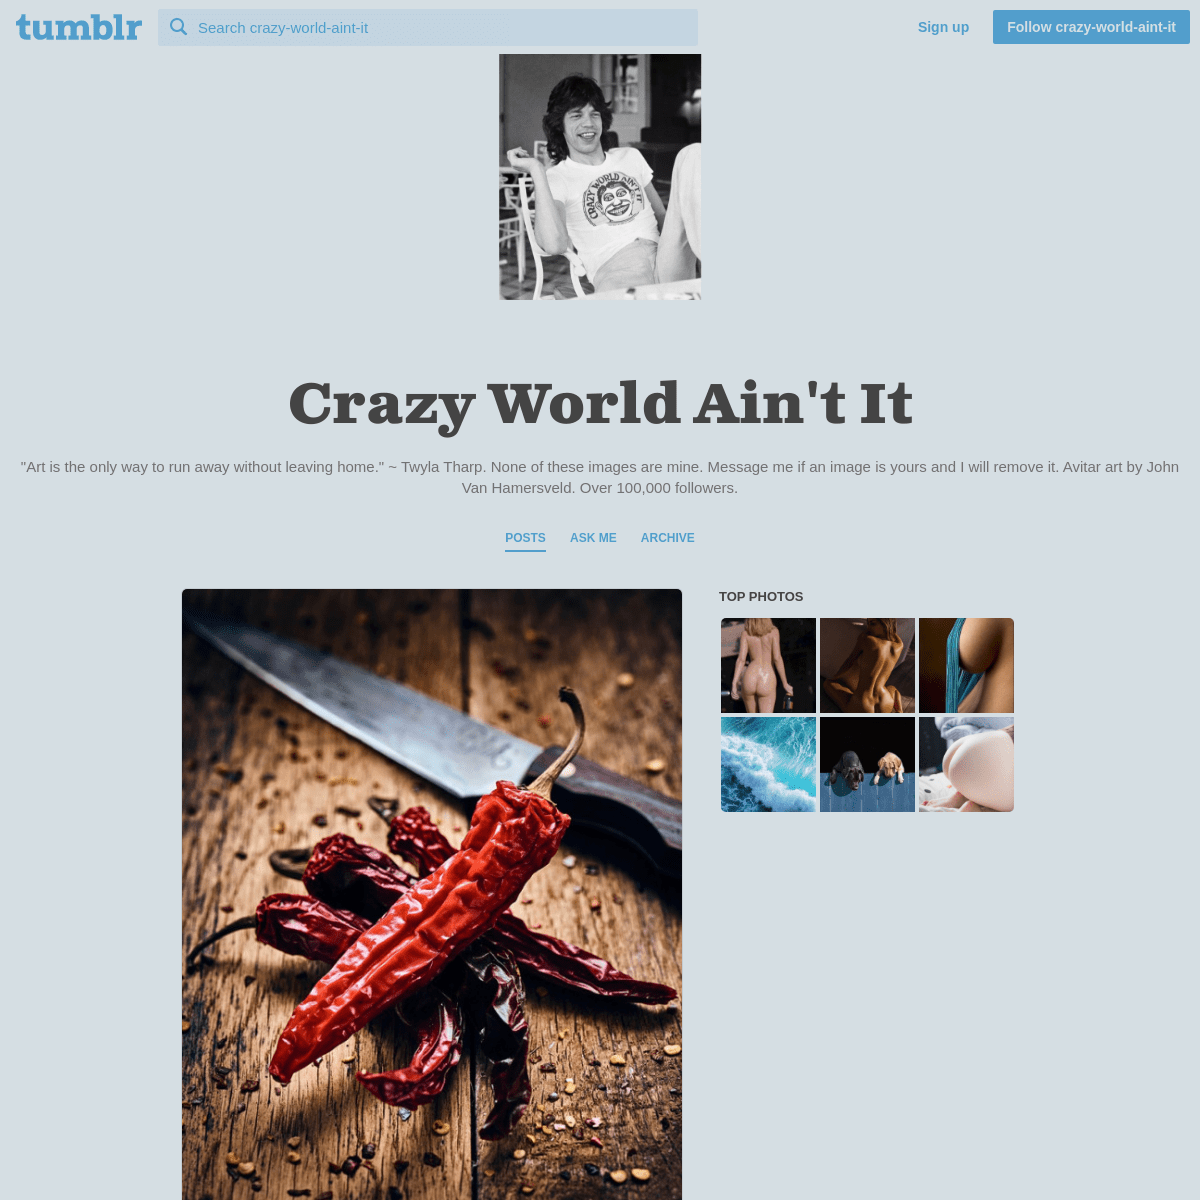 A complete backup of crazy-world-aint-it.tumblr.com